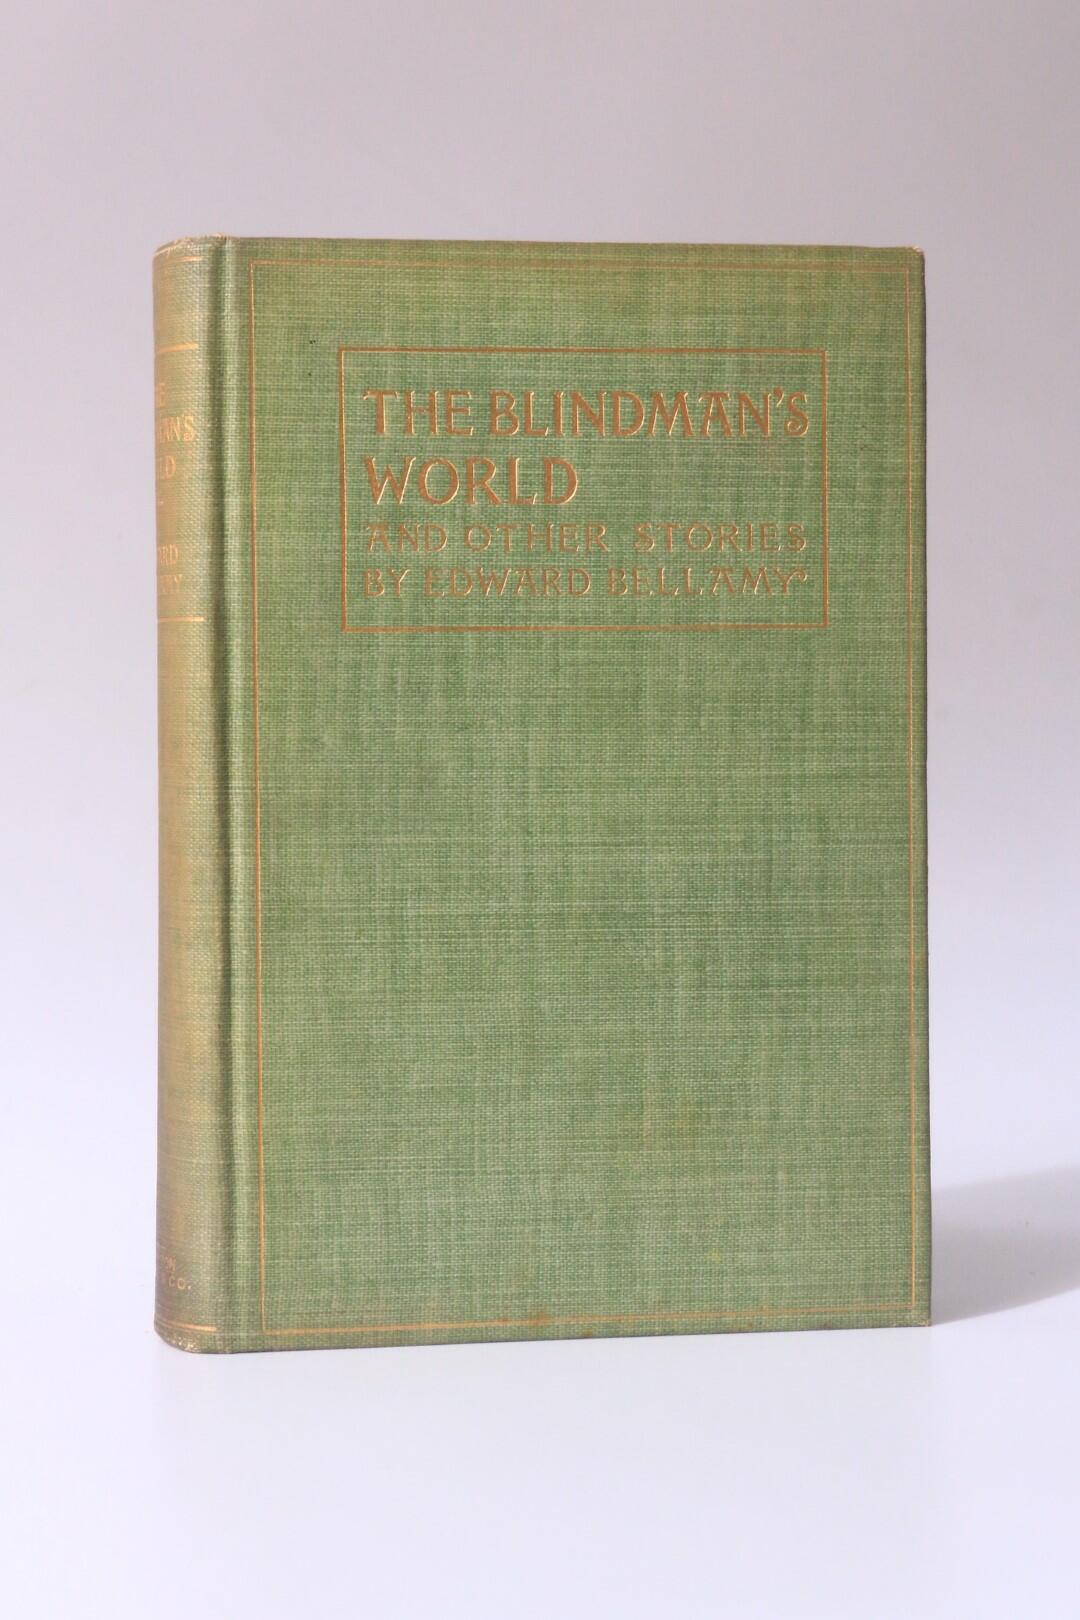 Edward Bellamy - The Blindman's World and Other Stories - Houghton Mifflin and Co., 1898, First Edition.